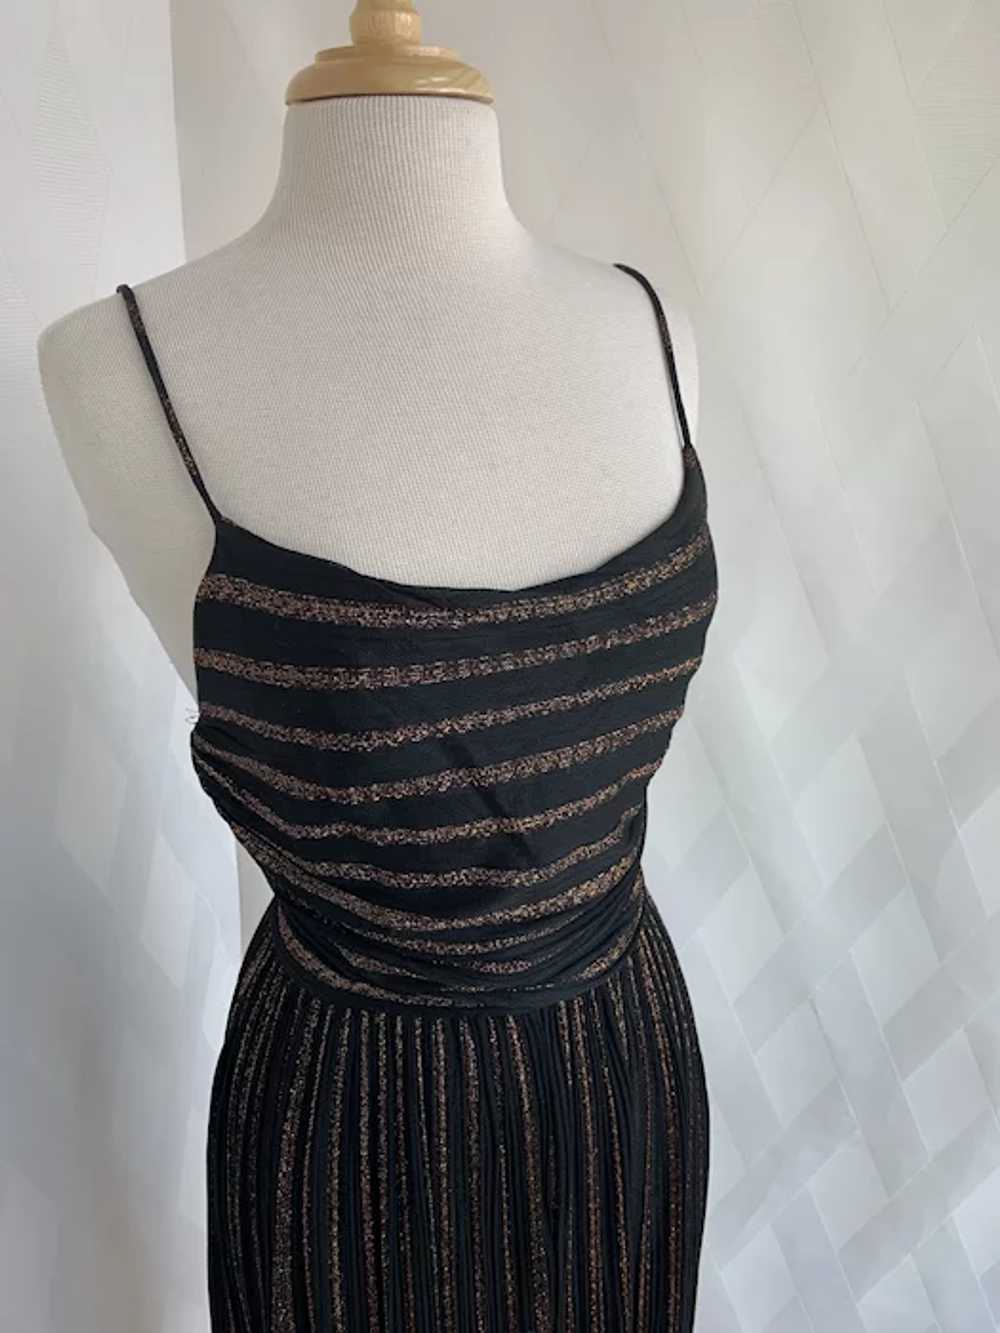 1980s Strappy, Copper Metallic Dress with Jacket - image 10